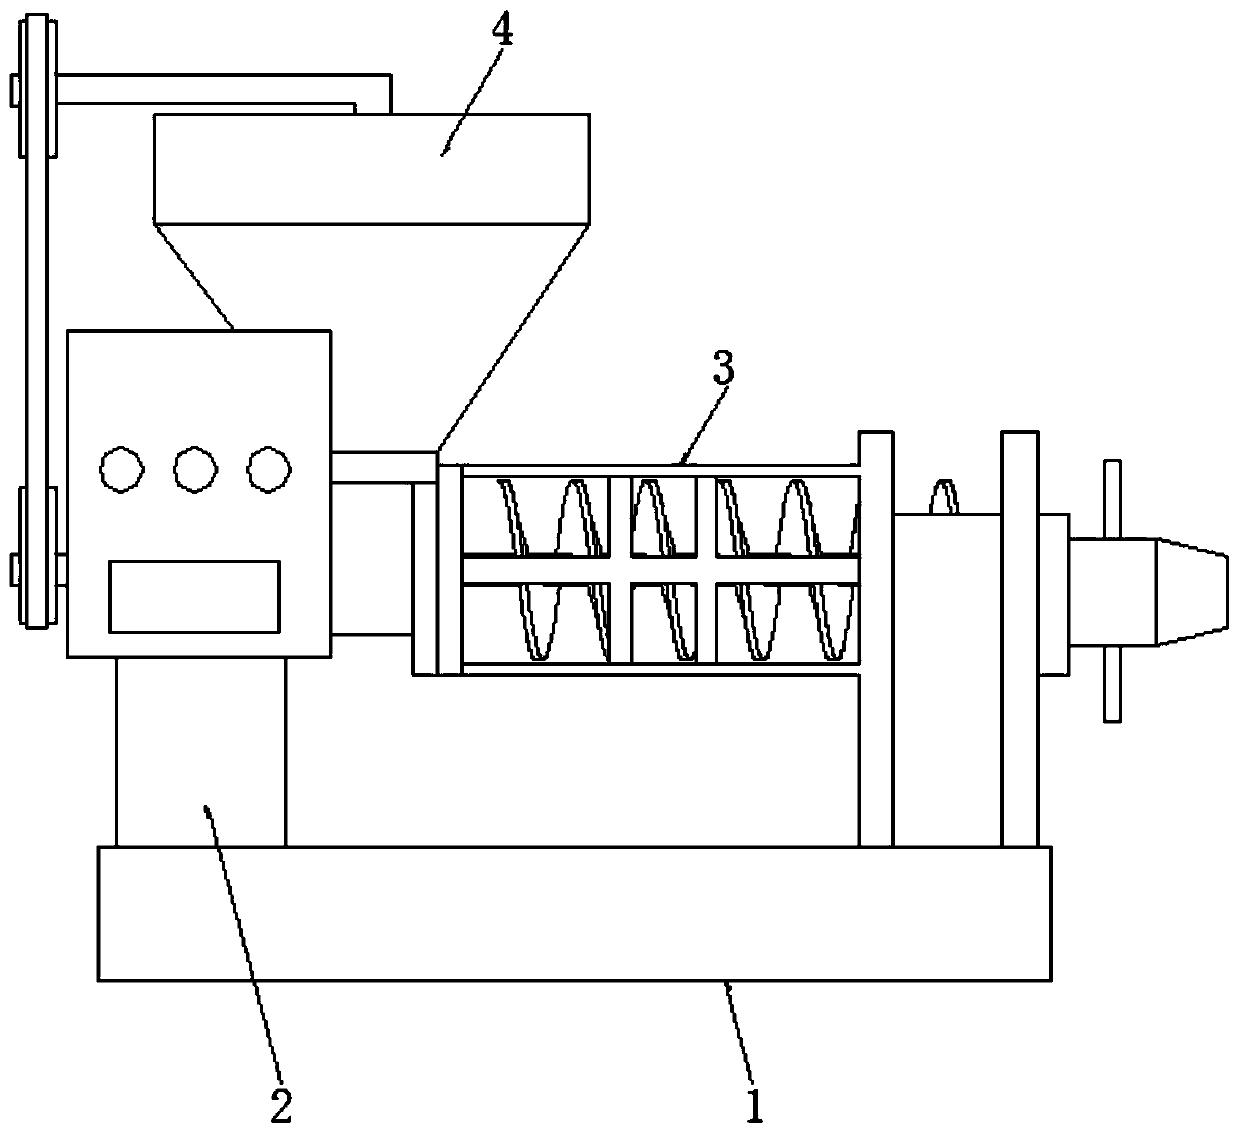 Oil expeller capable of changing expelling speed and preventing blockage based on gravity variation